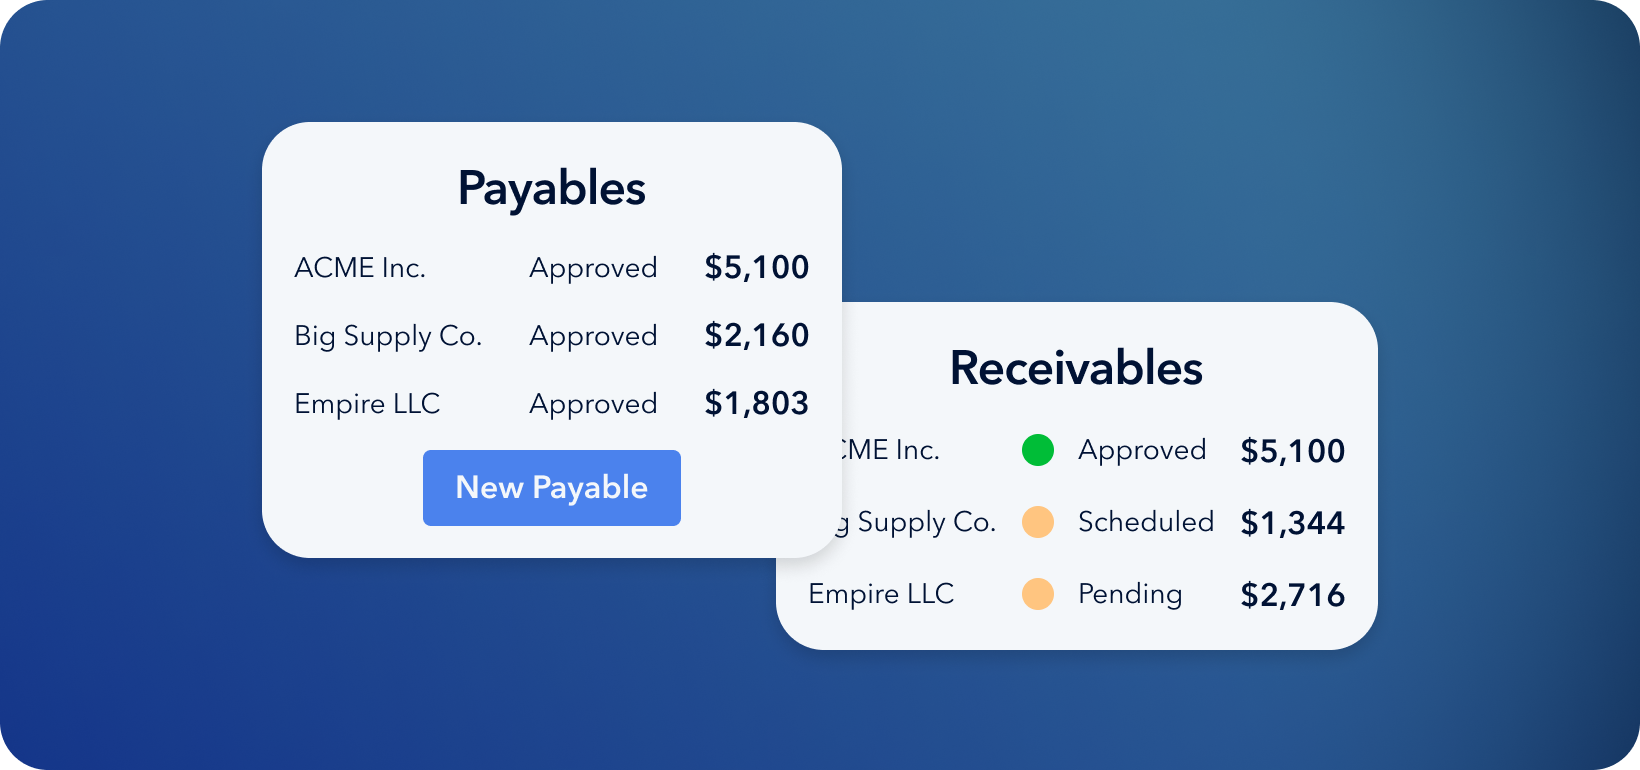 Screengrab from Plooto payment software. Shows up-to-date status of payables and receivables, with buttons that allow users to add new transactions.